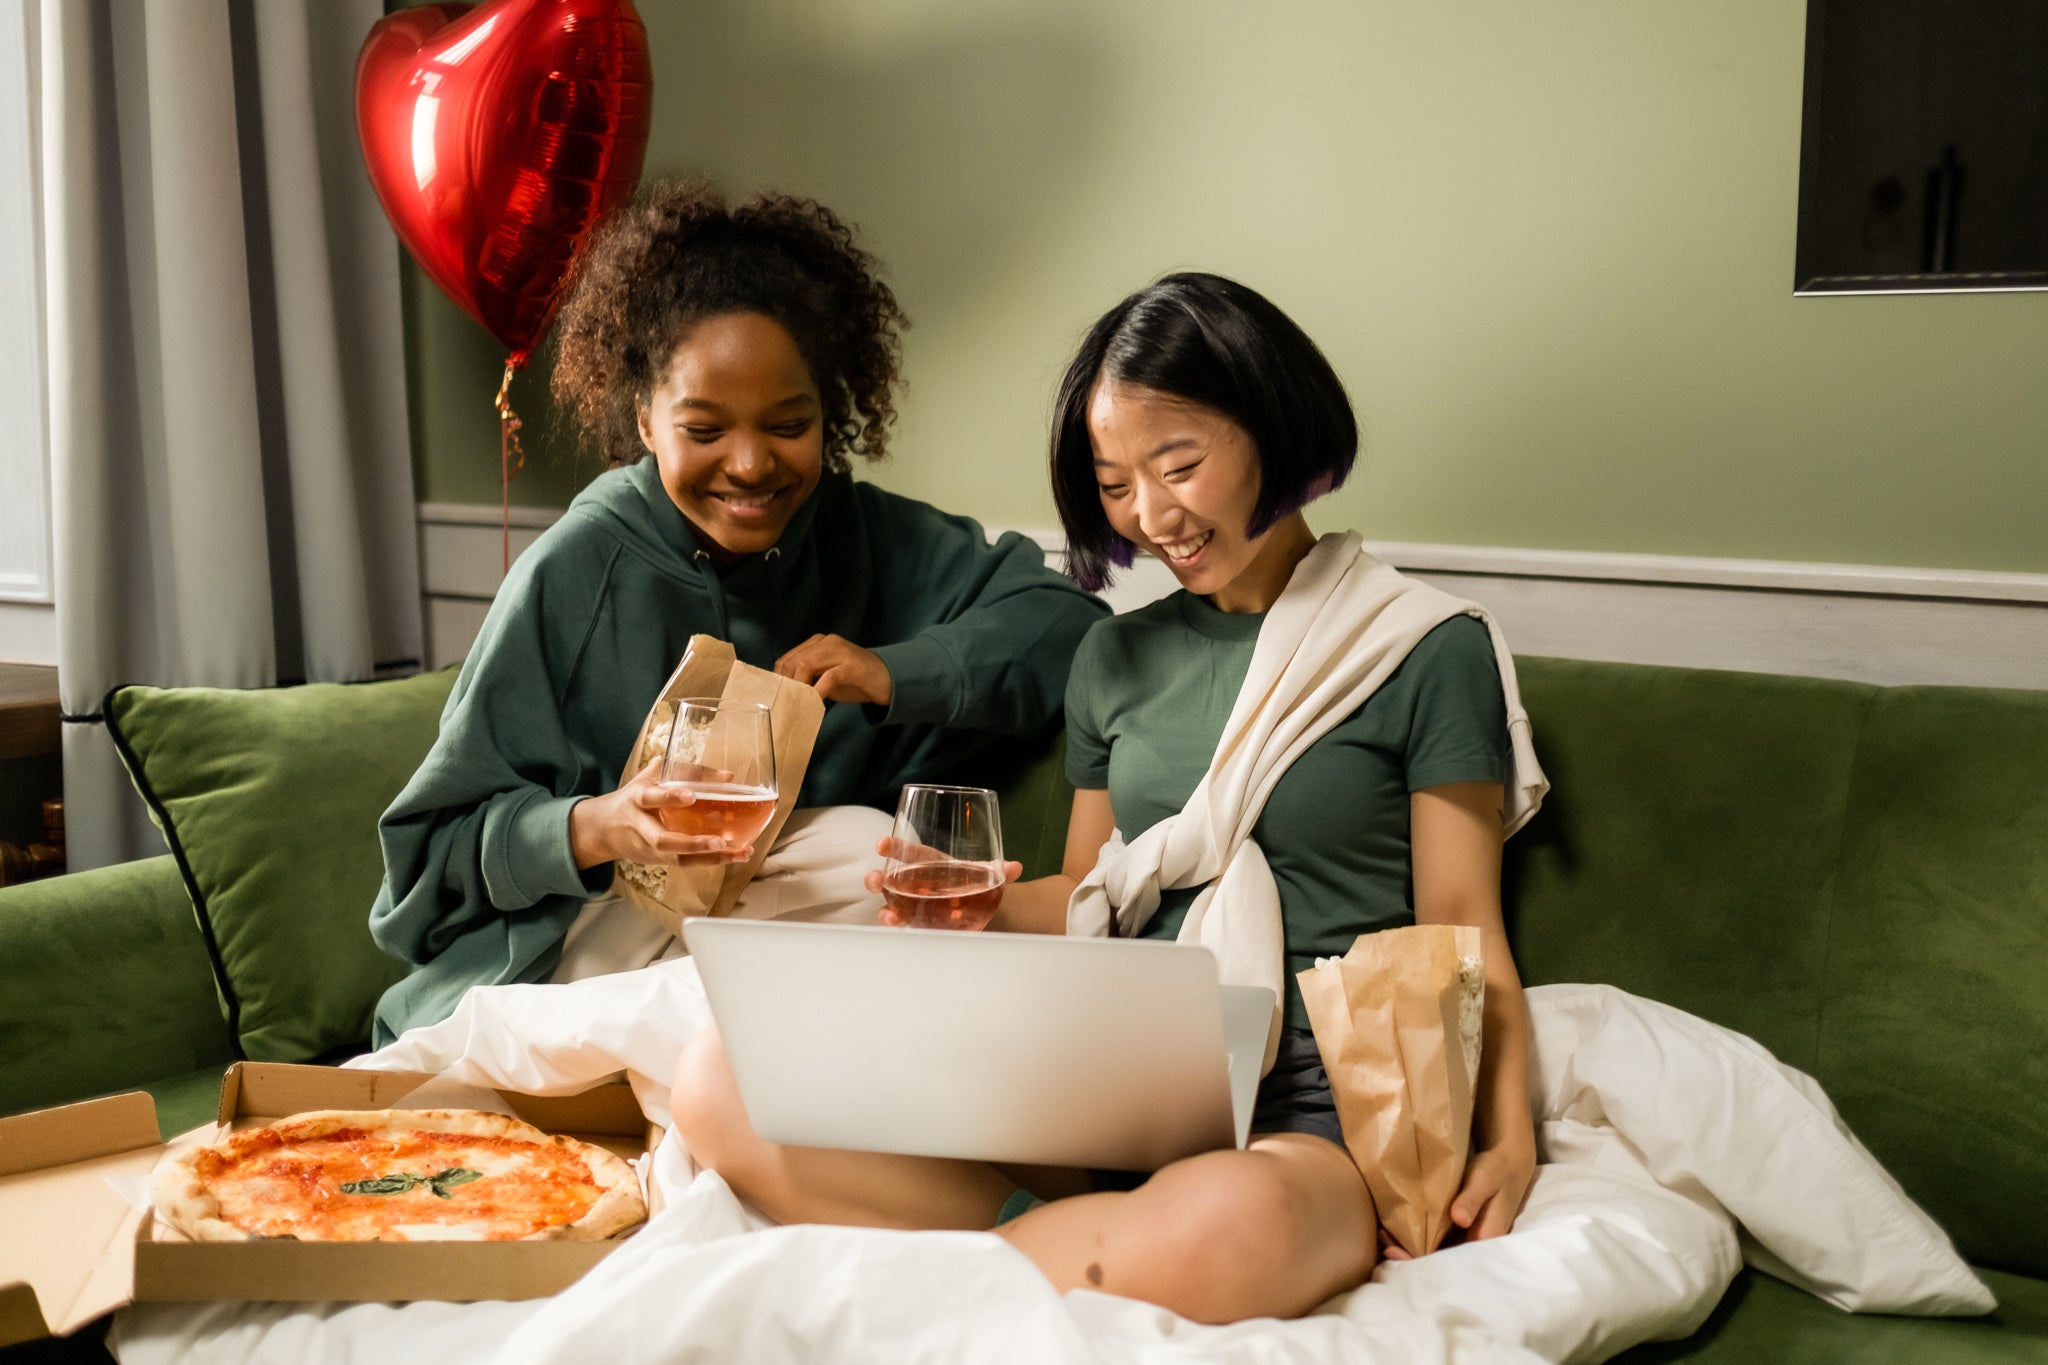 Couple, two women, enjoy a glass of rose together on a couch with a pizza and laptop. A red heart balloon behind them.